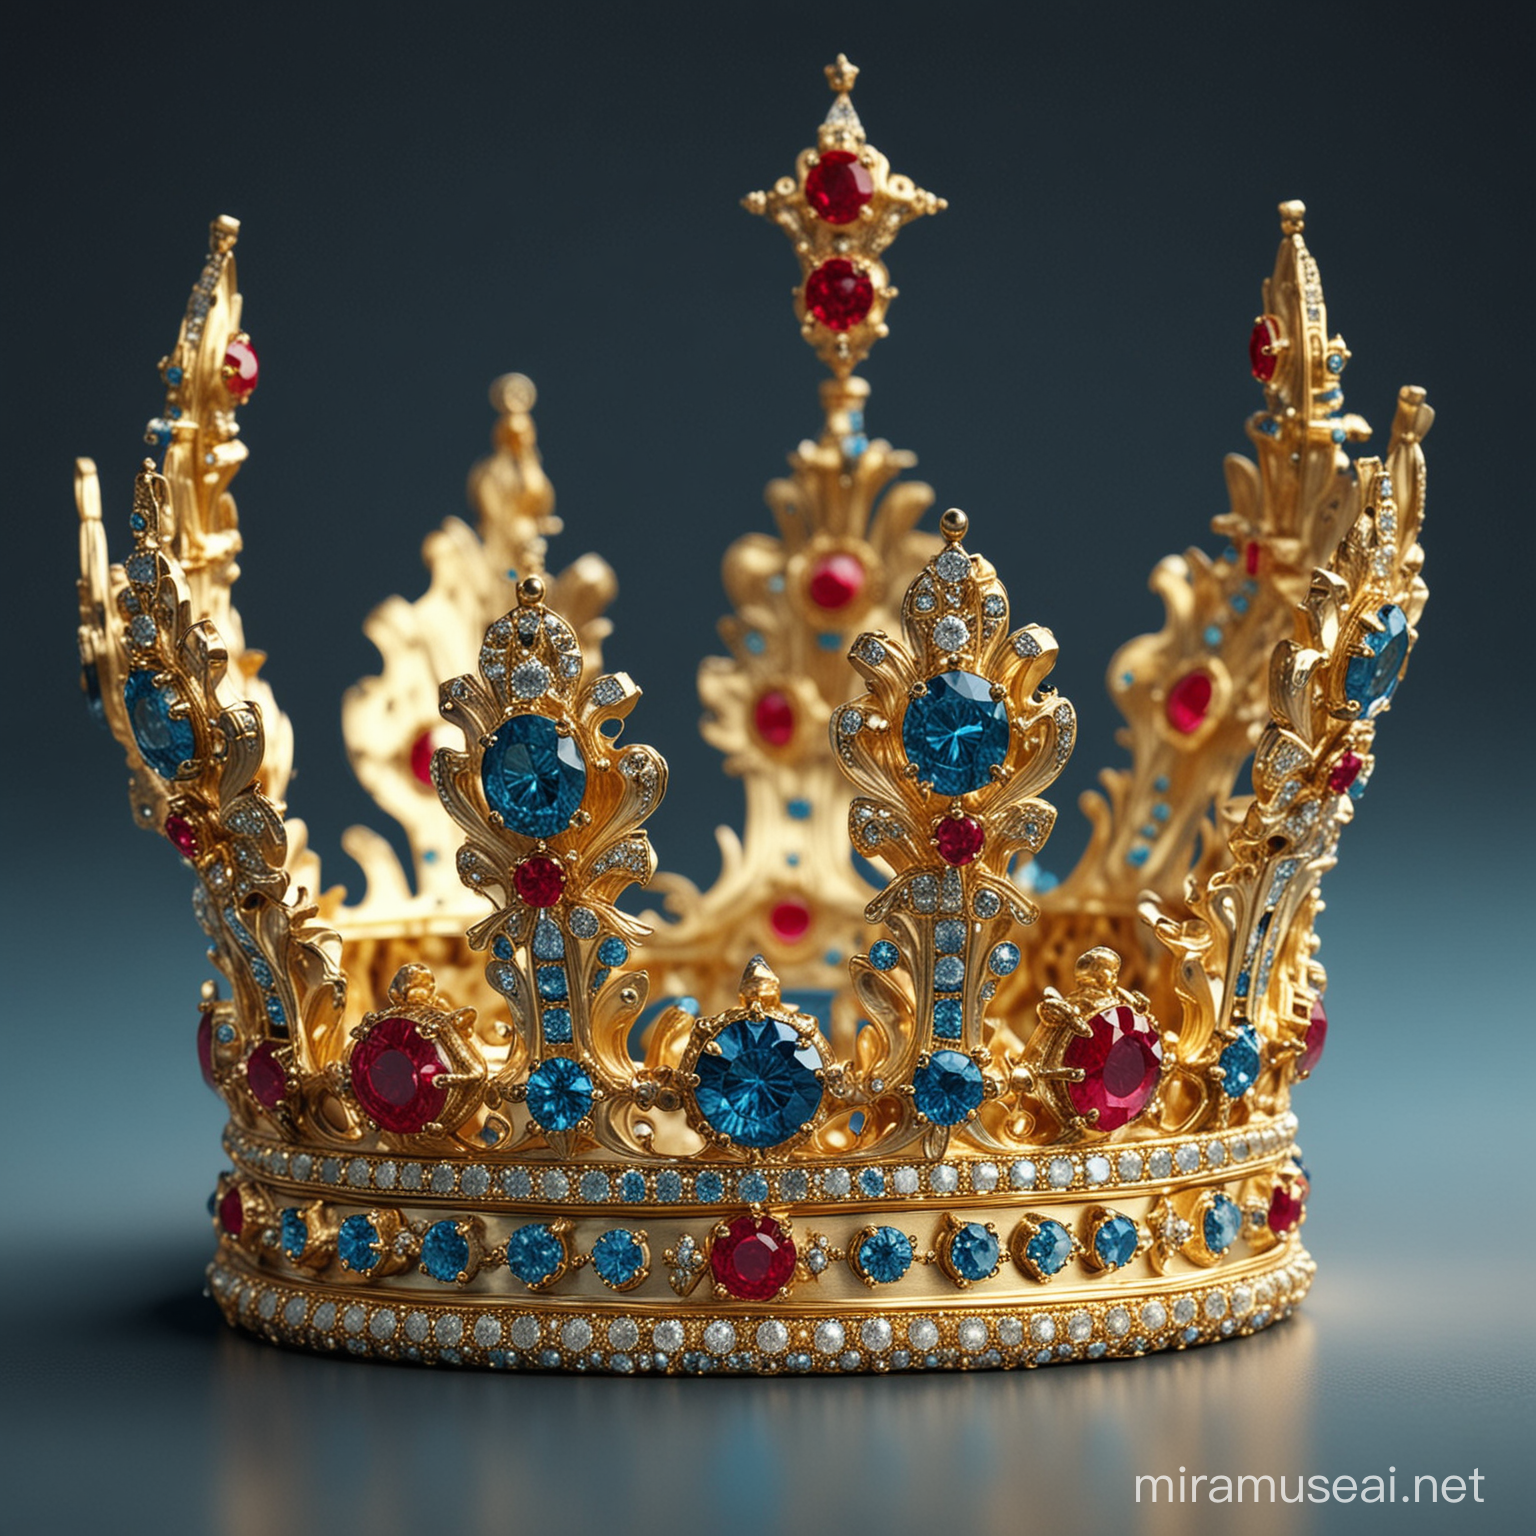 Exquisite Kings Crown Gold Ruby and Blue Diamonds